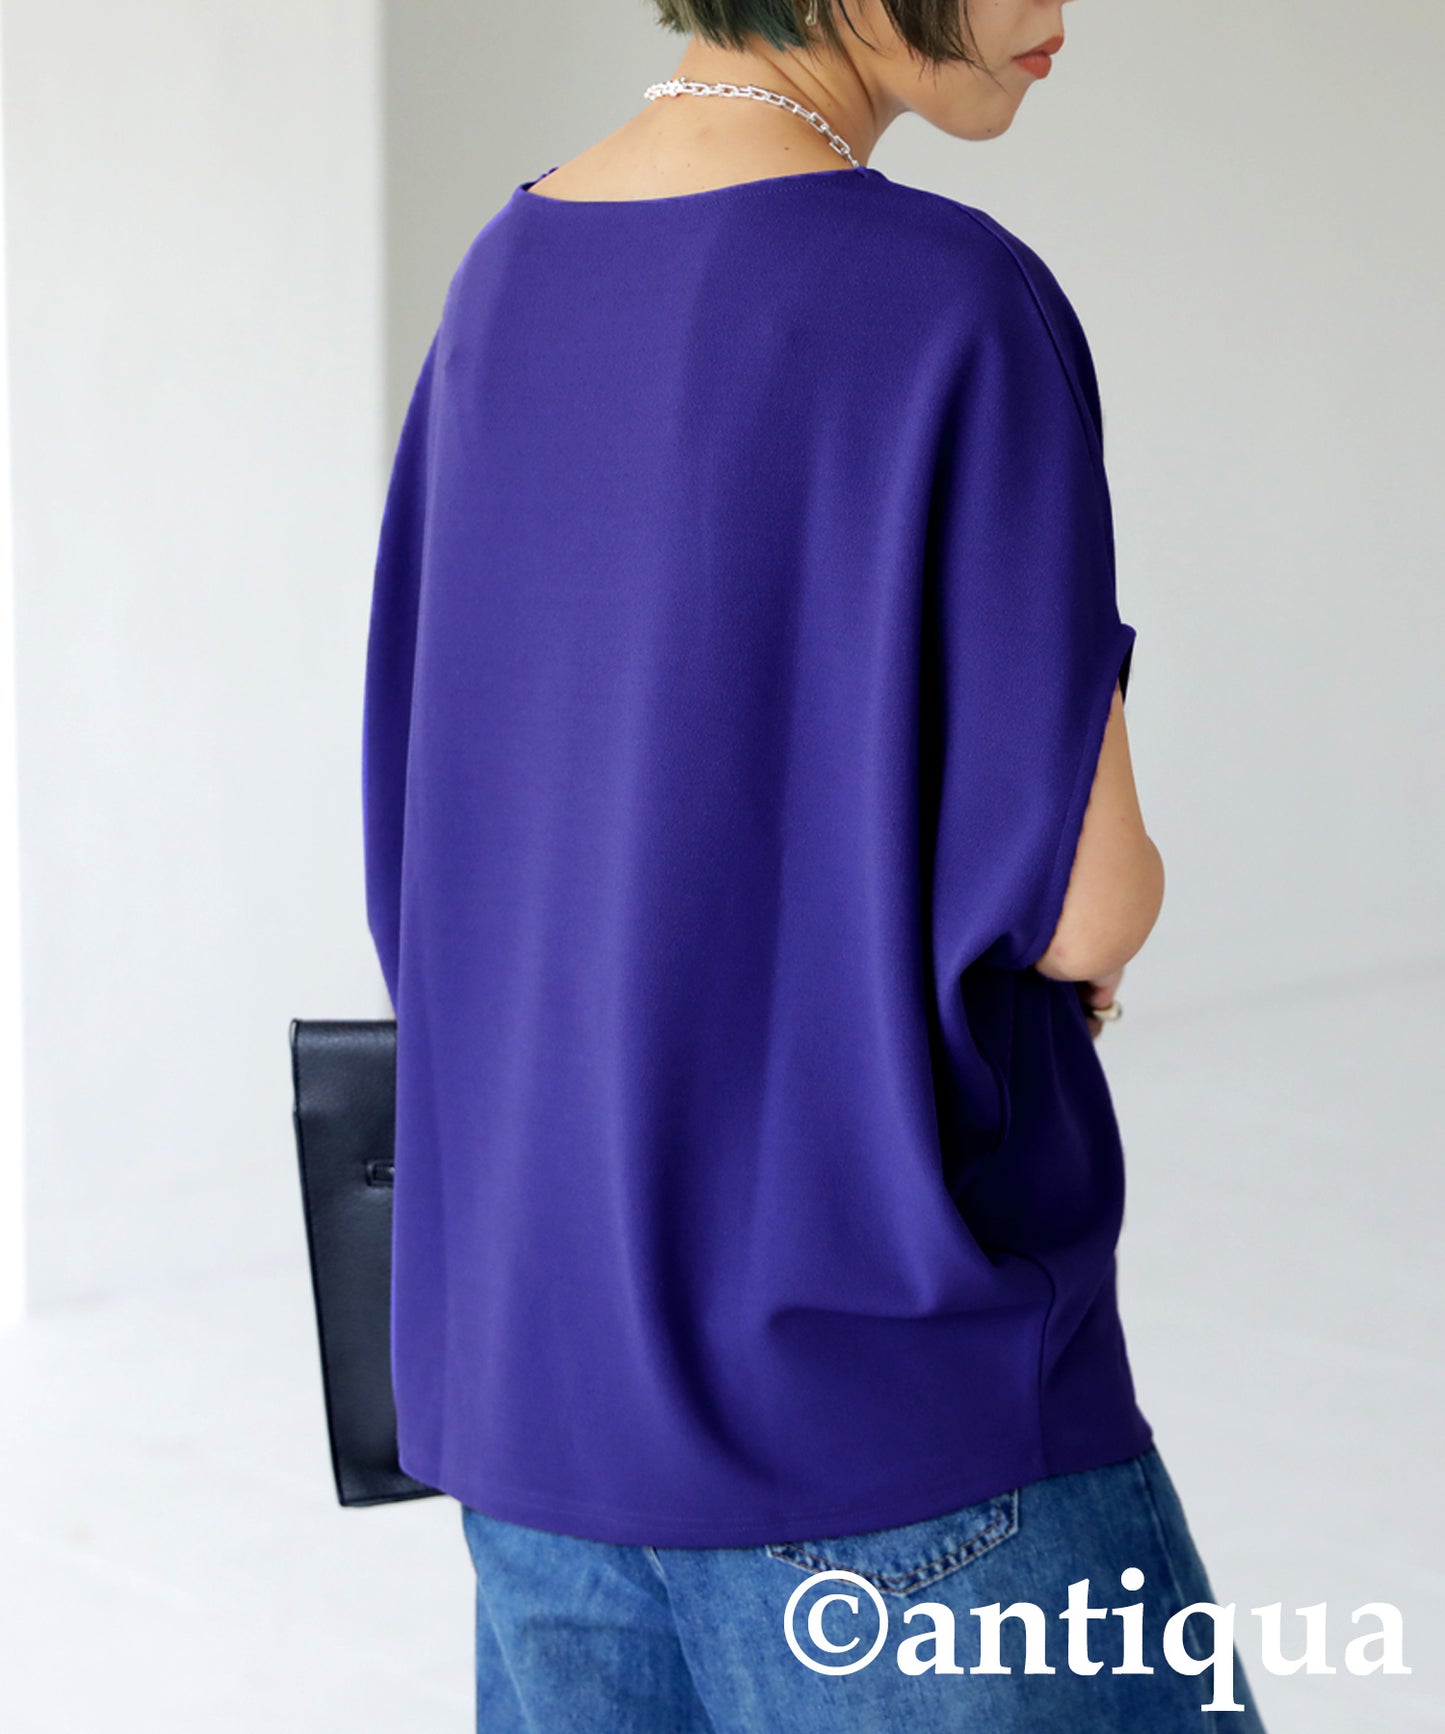 Boat neck deformed French sleeve tops Solid color Ladies tops